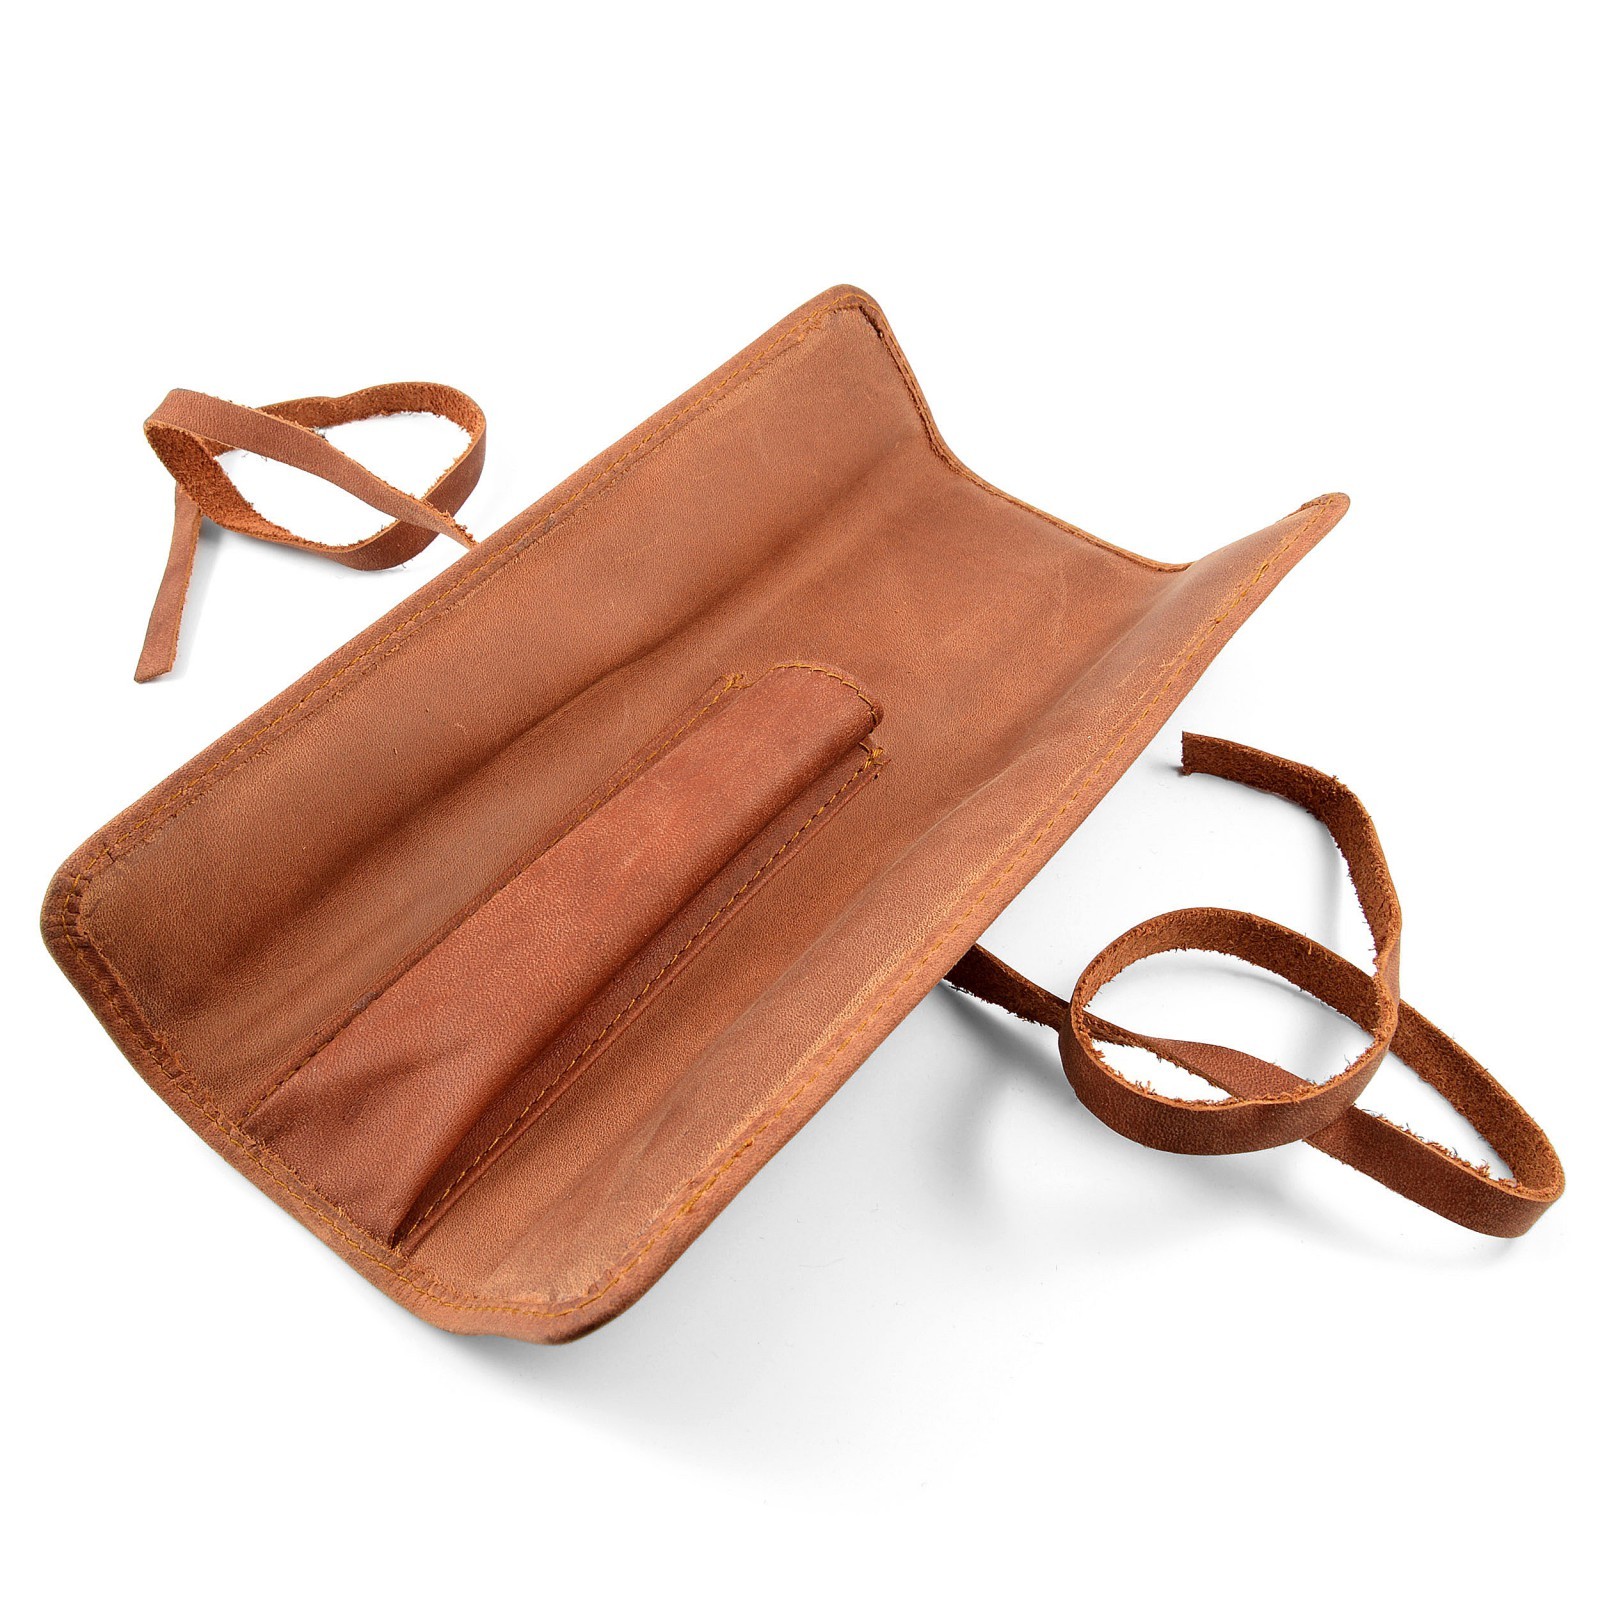 Roll up leather straight razor case 